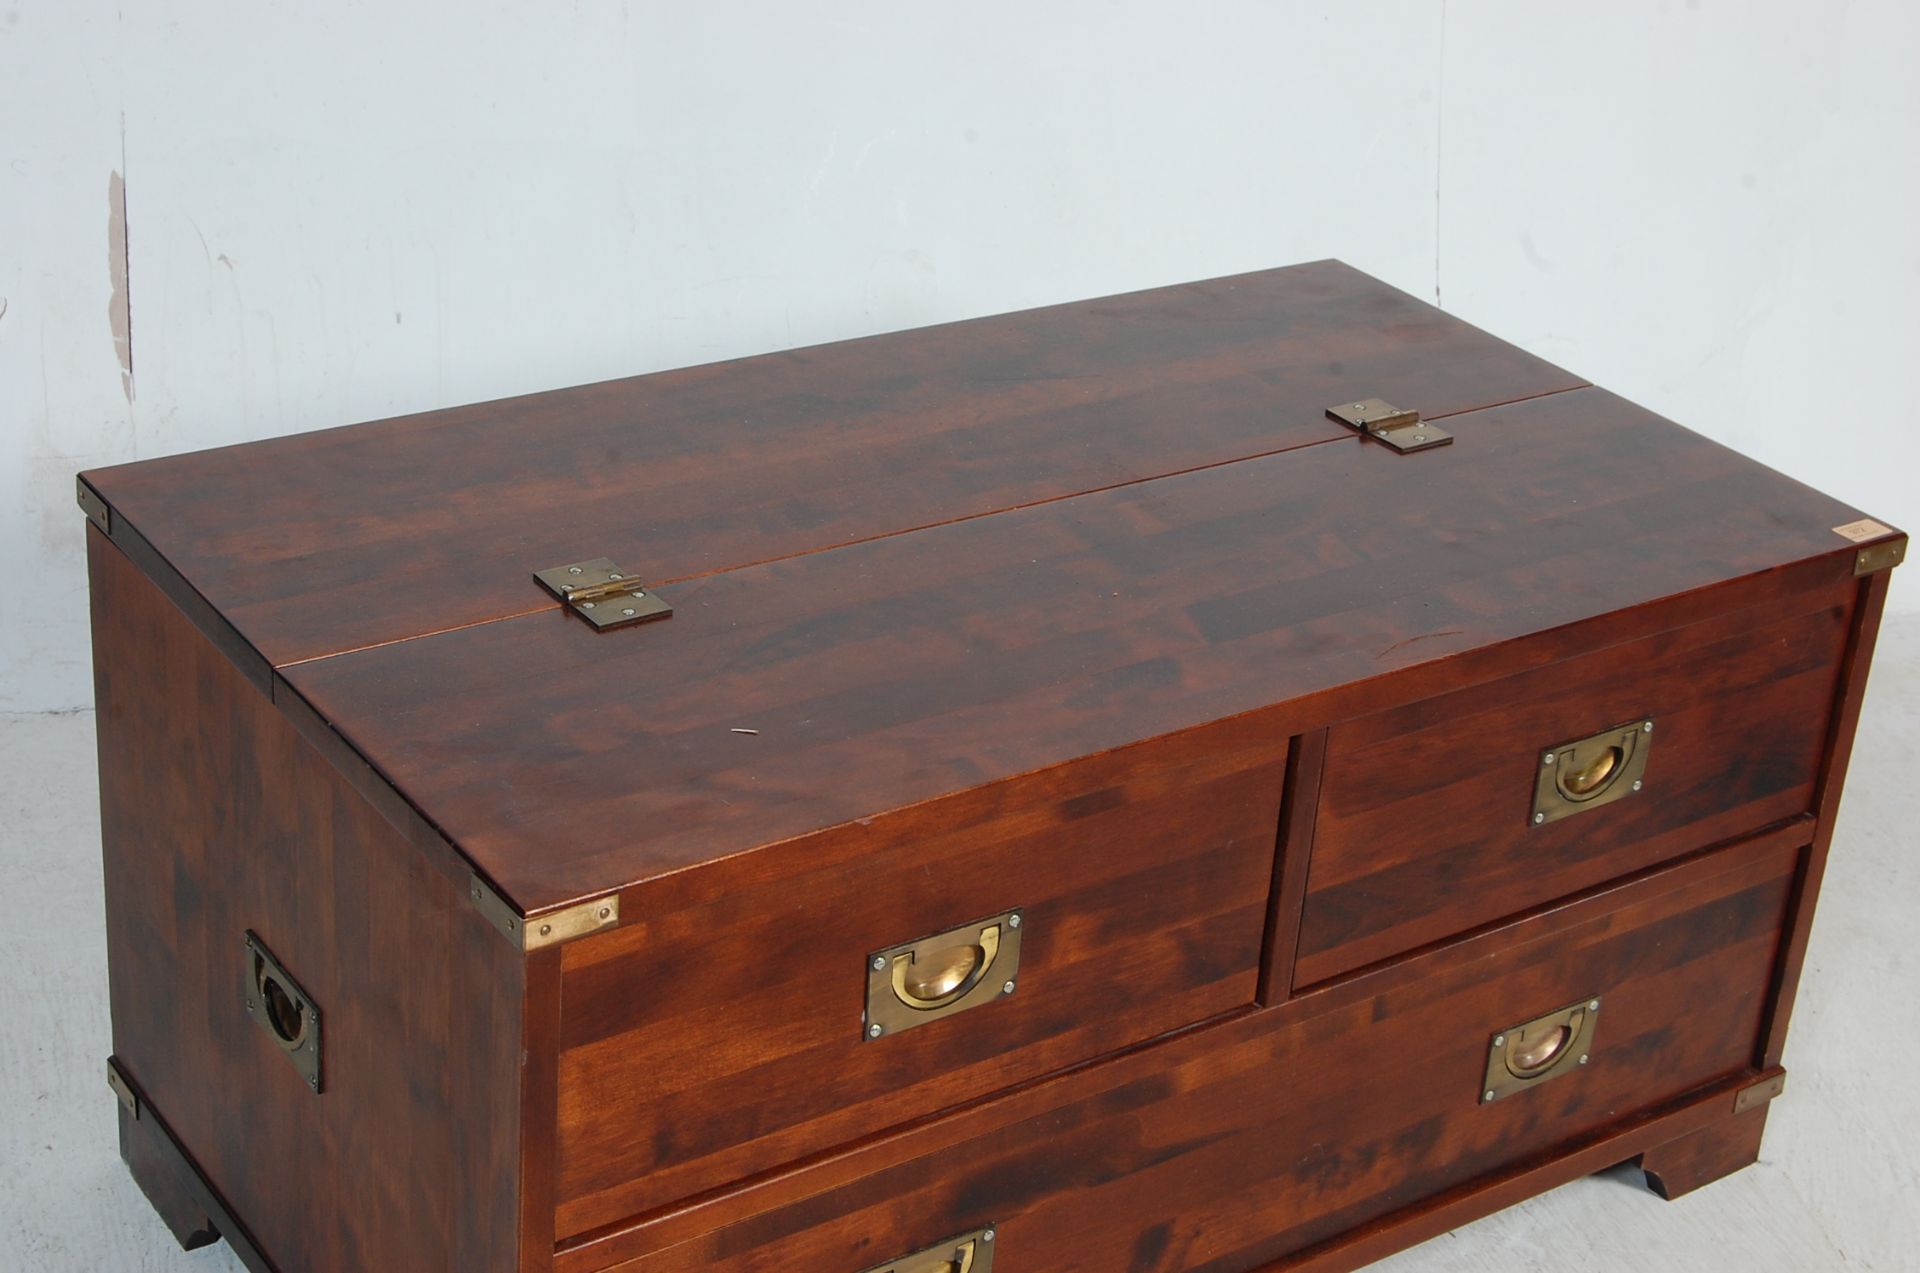 ANTIQUE STYLE LAURA ASHLEY CAMPAIGN CHEST - Image 2 of 5